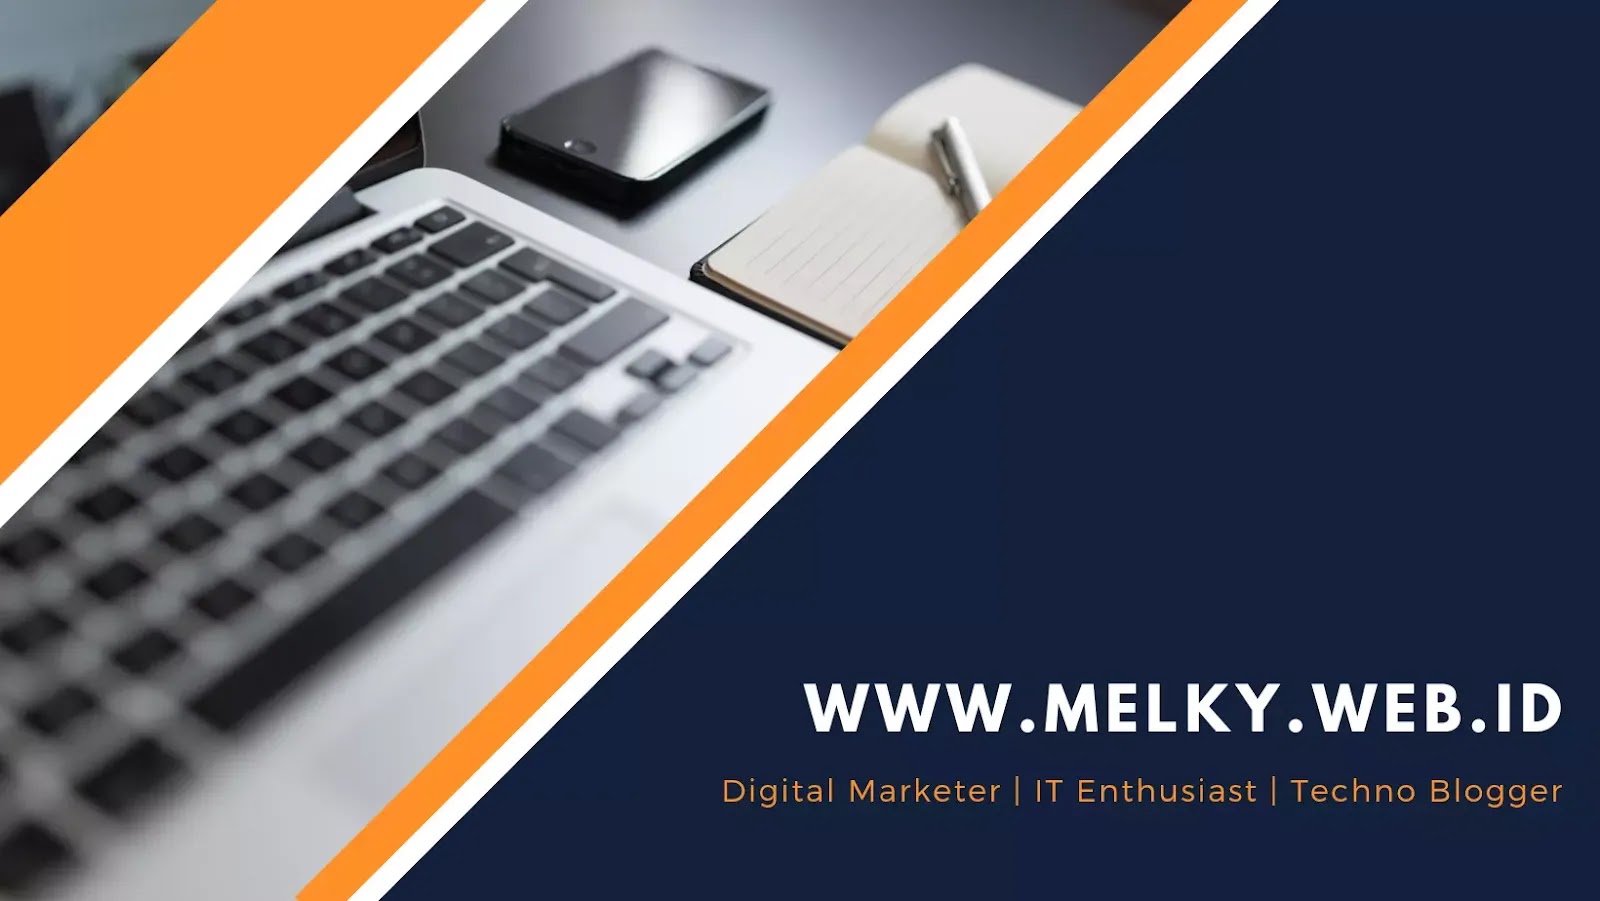 Overview of Blog & Contens Melky Web ID: Digital Marketer, IT Enthusiast, Techno Blogger